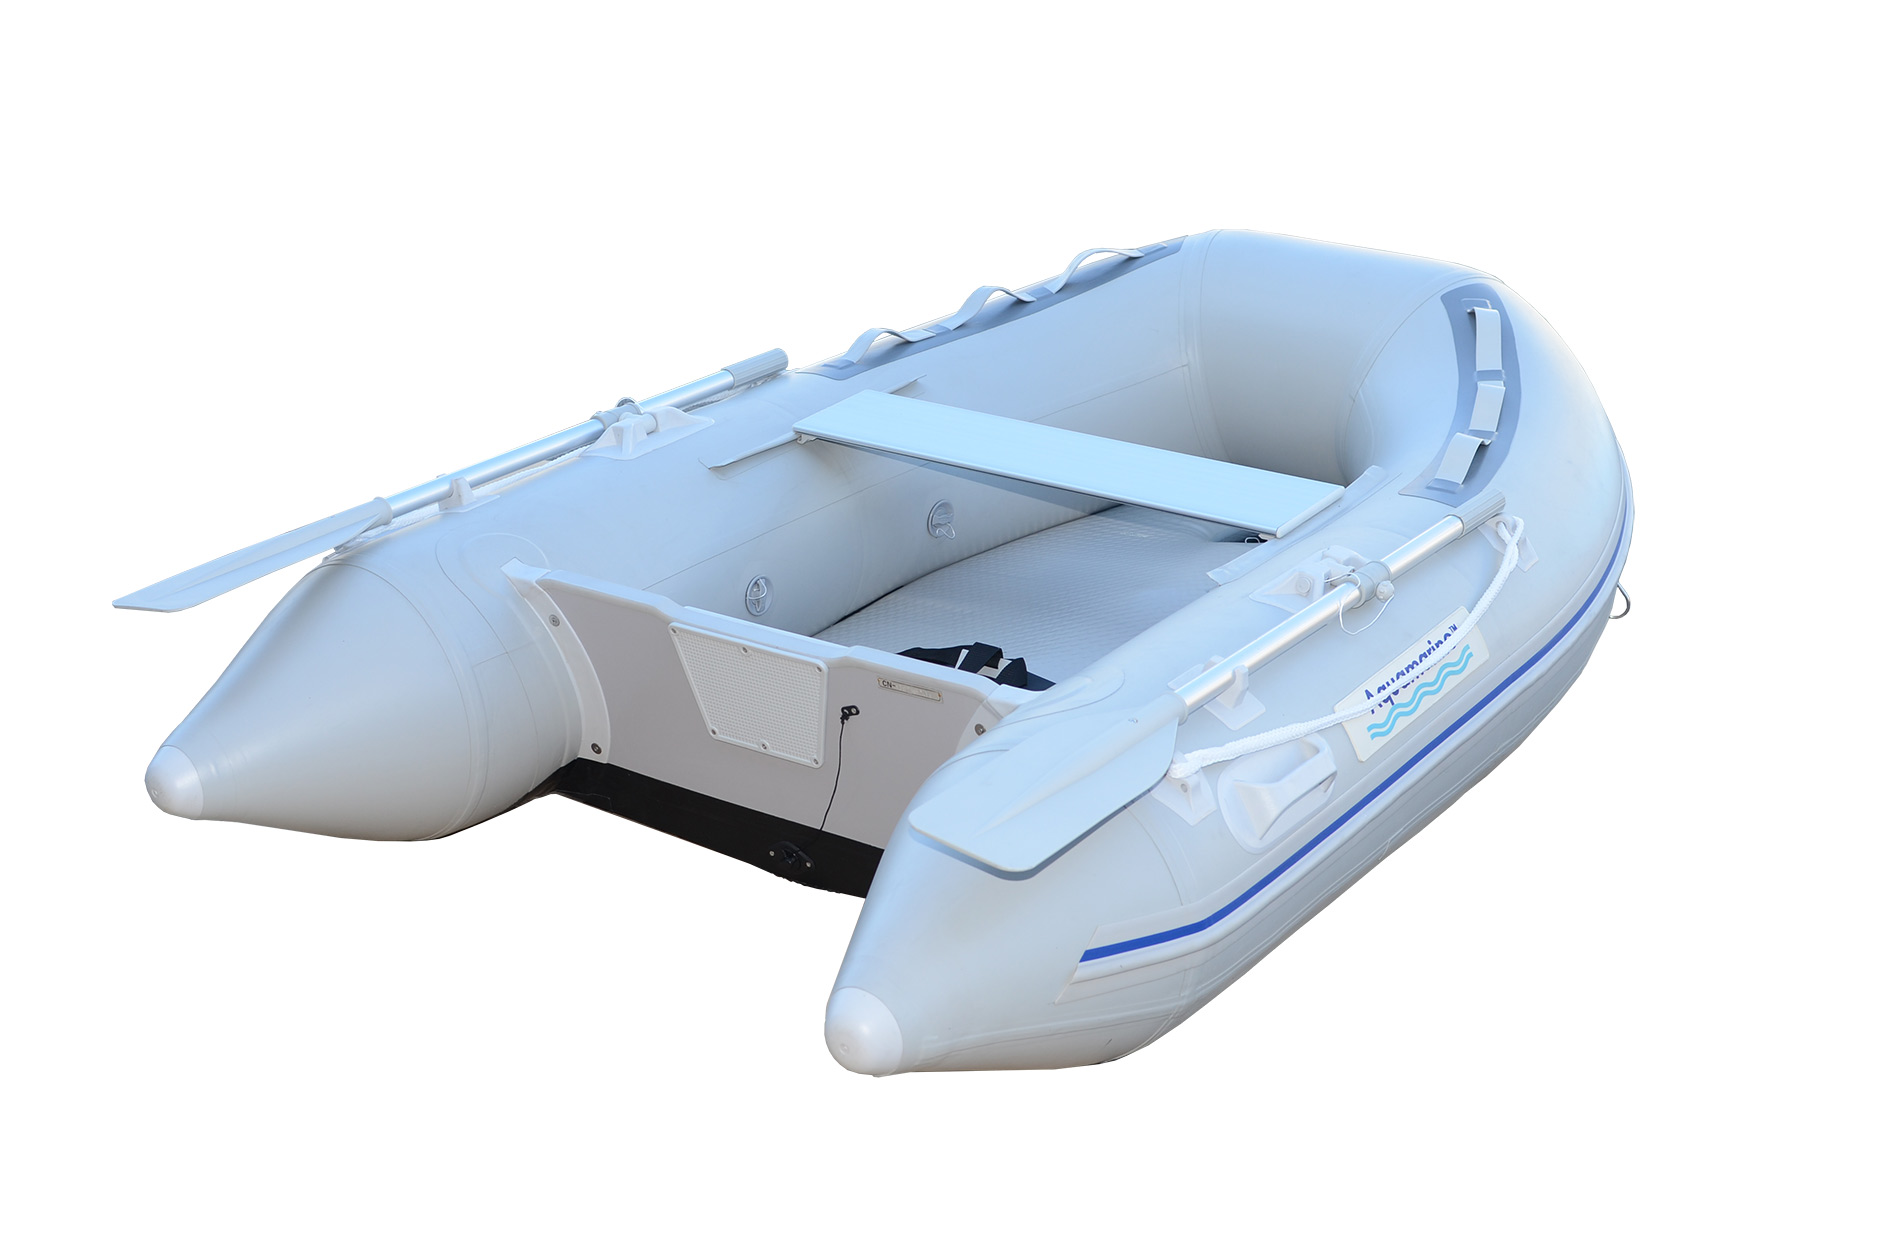 7.5 ft Inflatable dinghy boat with air deck 7 ft 6 in